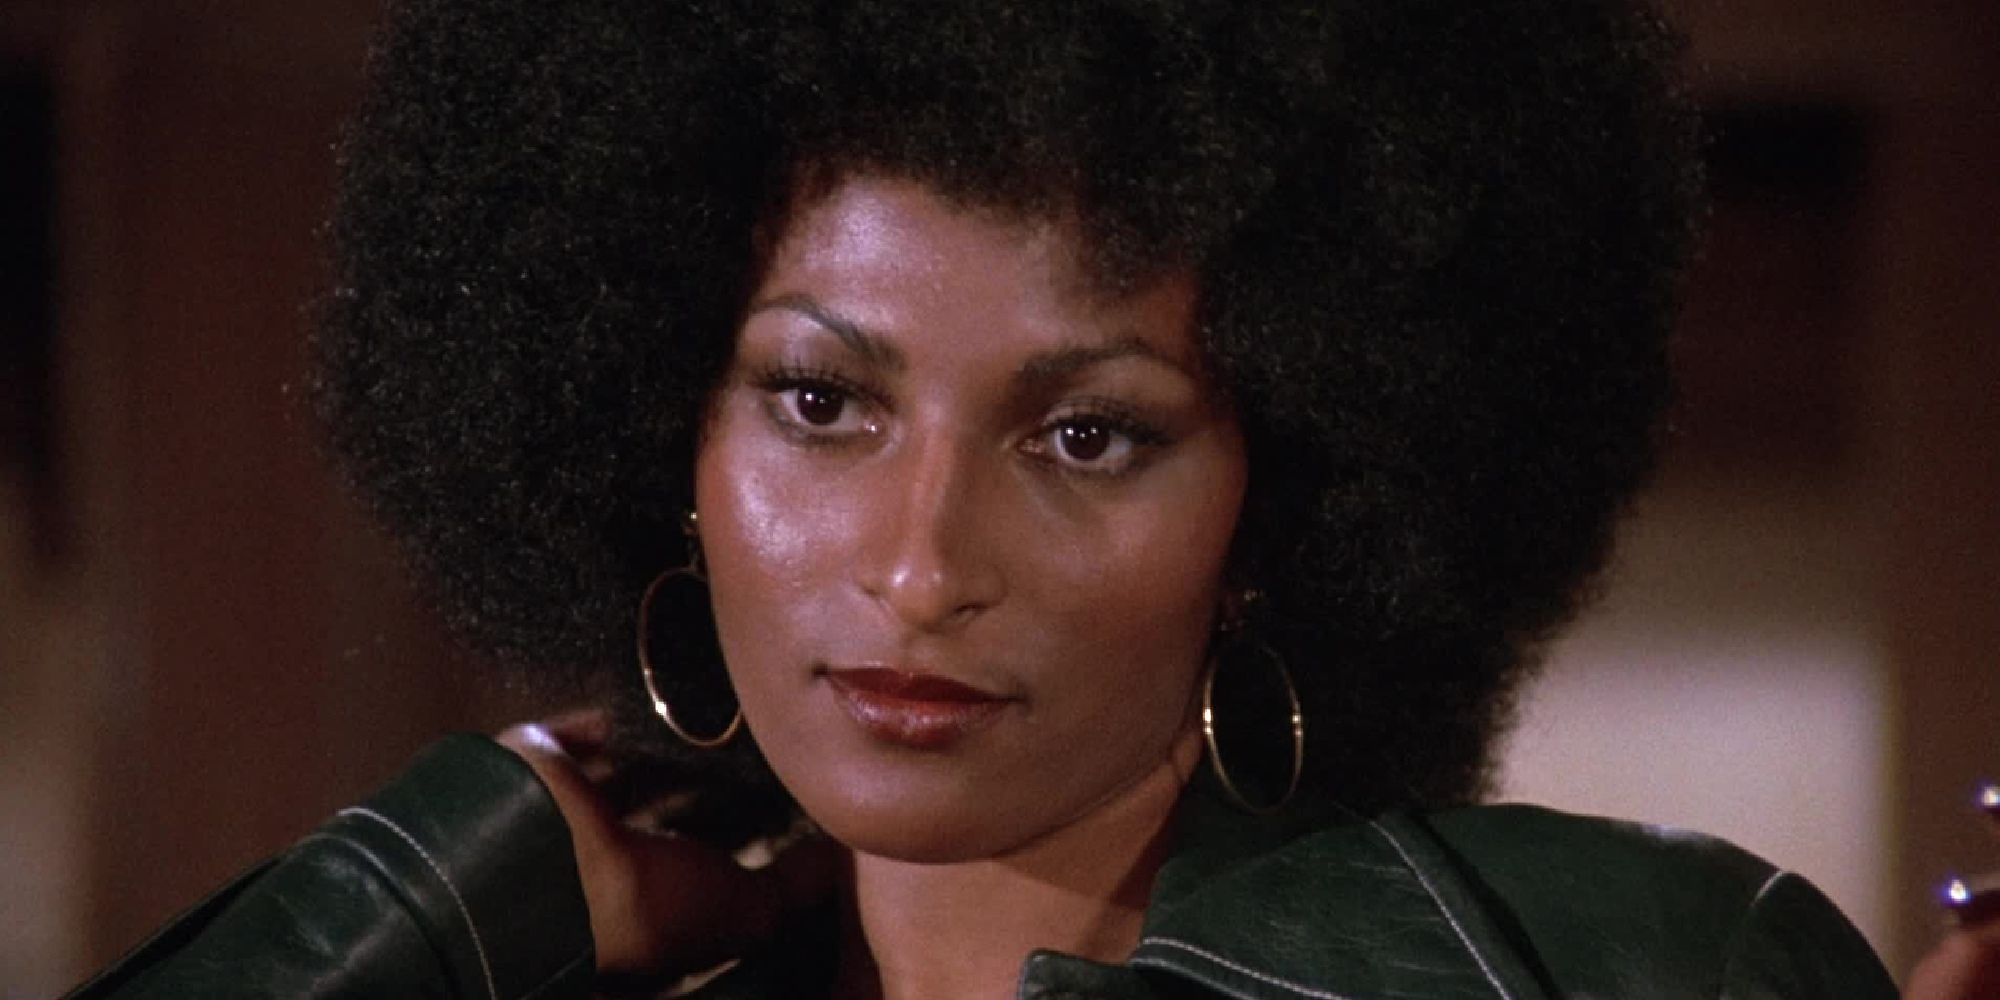 Pam Grier in Foxy Brown looking at someone or something off-camera and smirking.